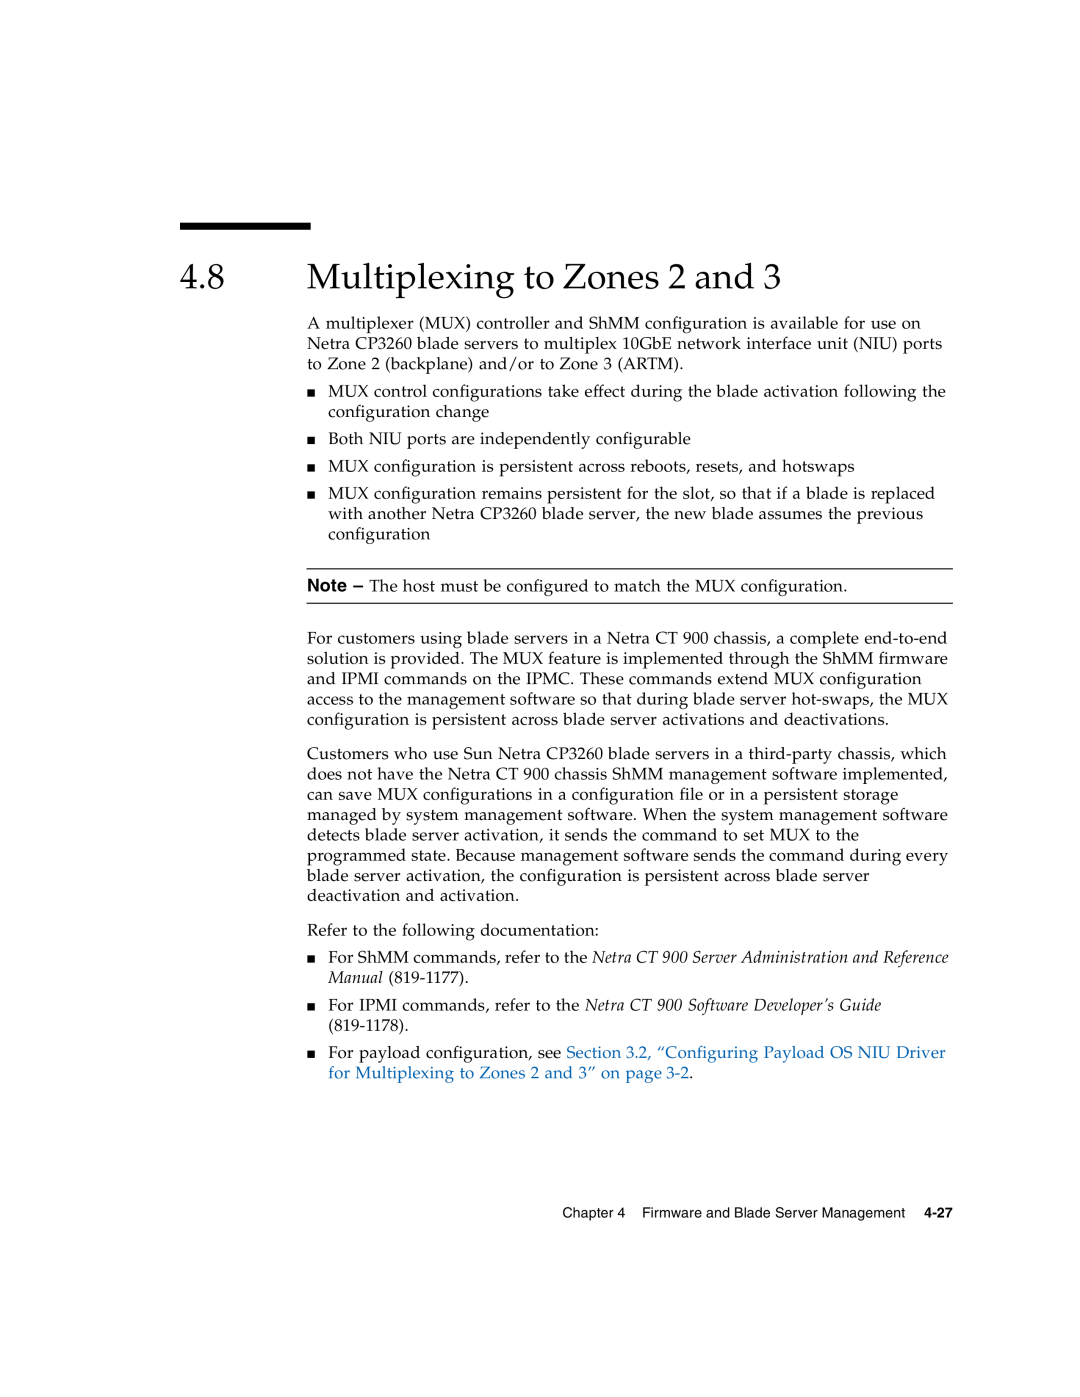 Sun Microsystems CP3260 manual Multiplexing to Zones 2 and 